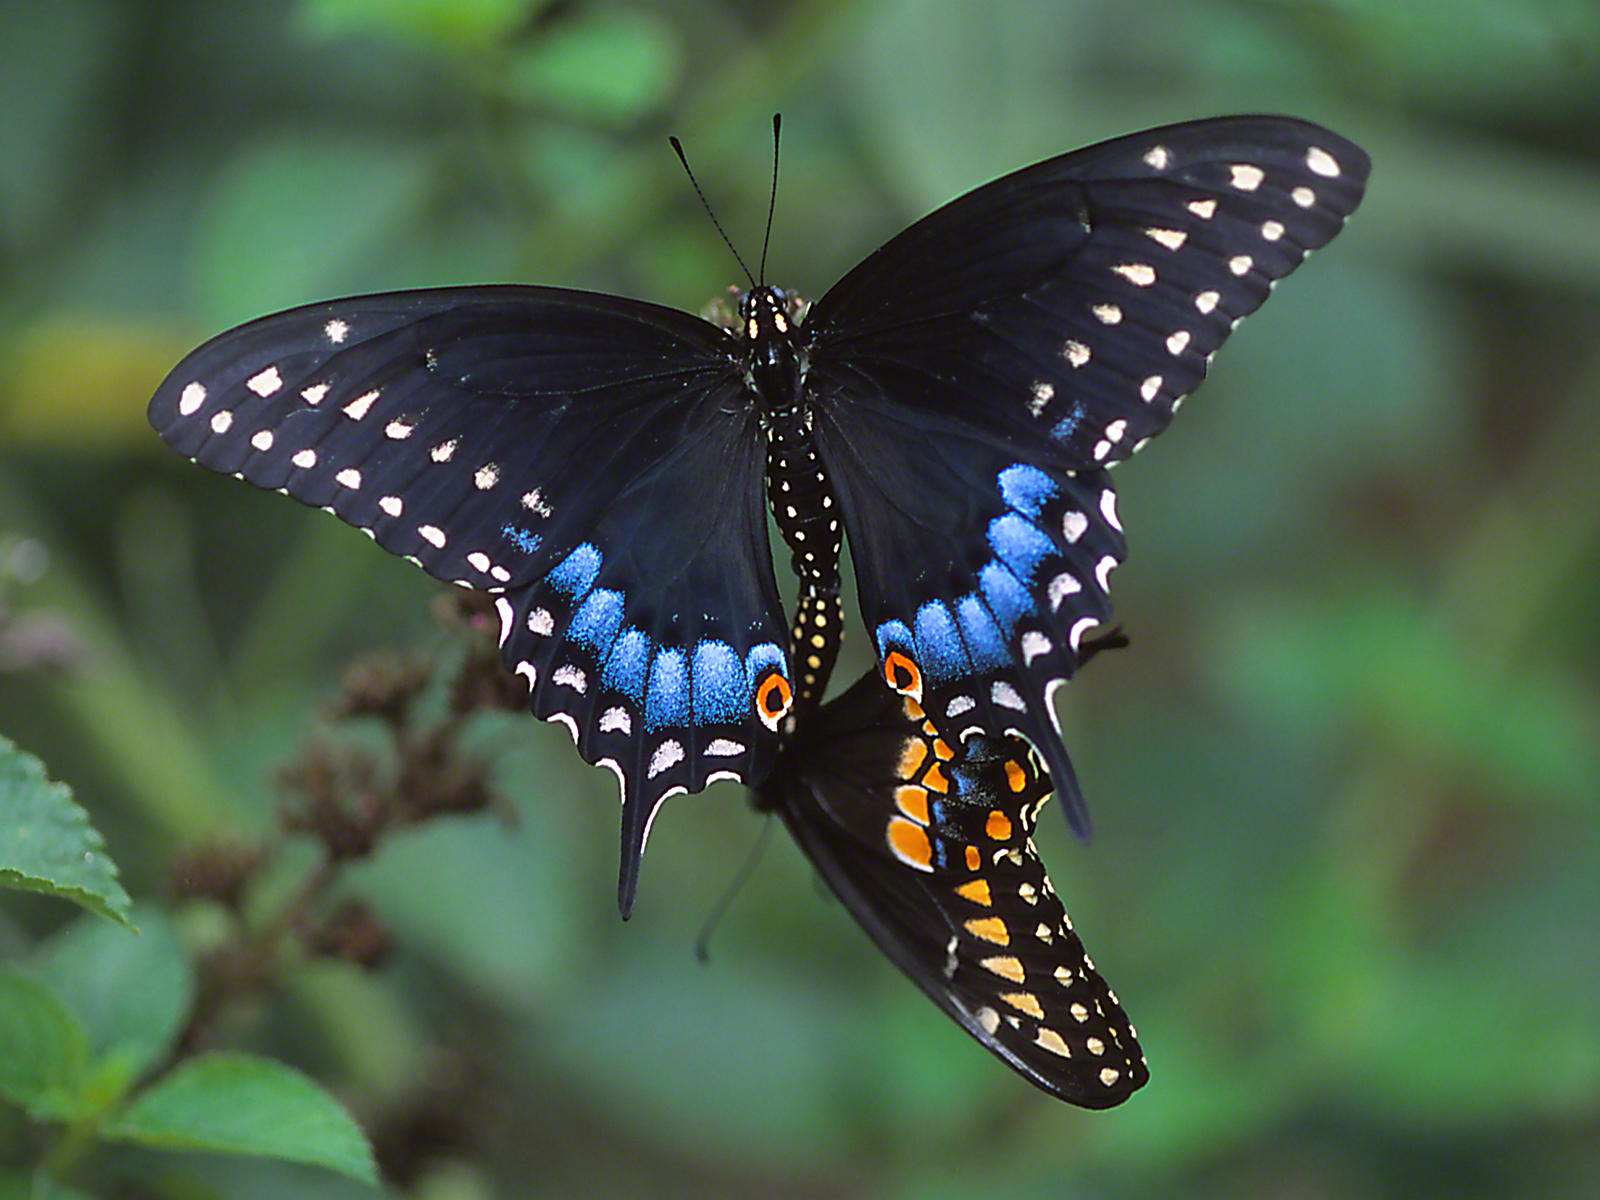 Earring Series - Blackswallowtail butterflies coupled, photographed by Jeff Zablow at "Butterflies and Blooms in the Briar Patch," Eatonton, GA